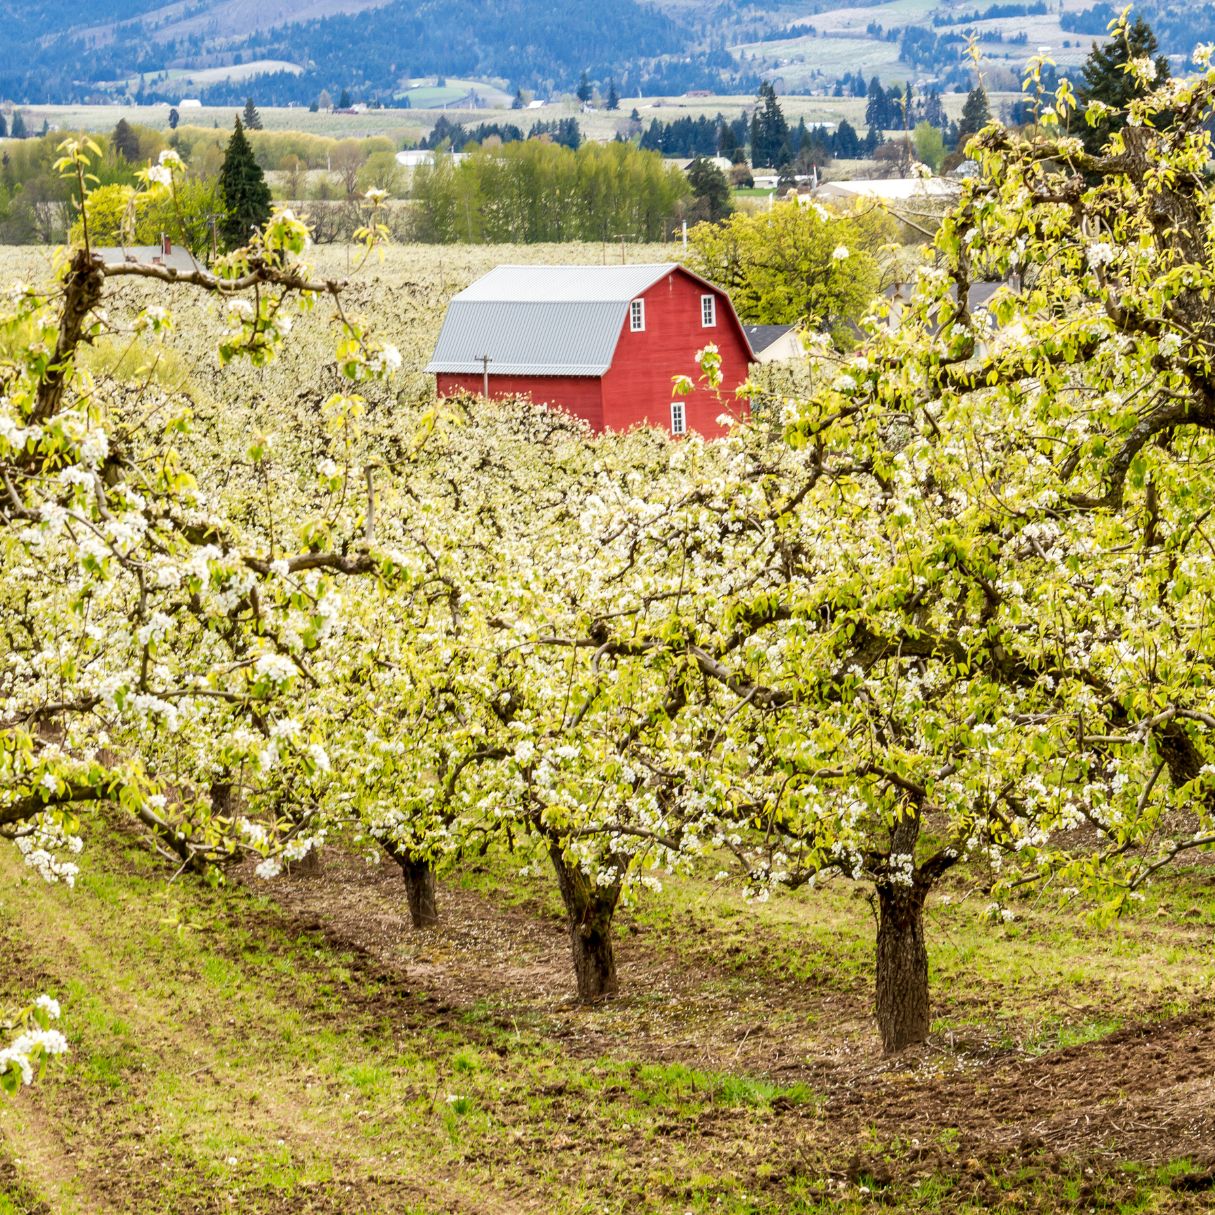 A scene in oregon of a red barn with pear trees in blossom. 